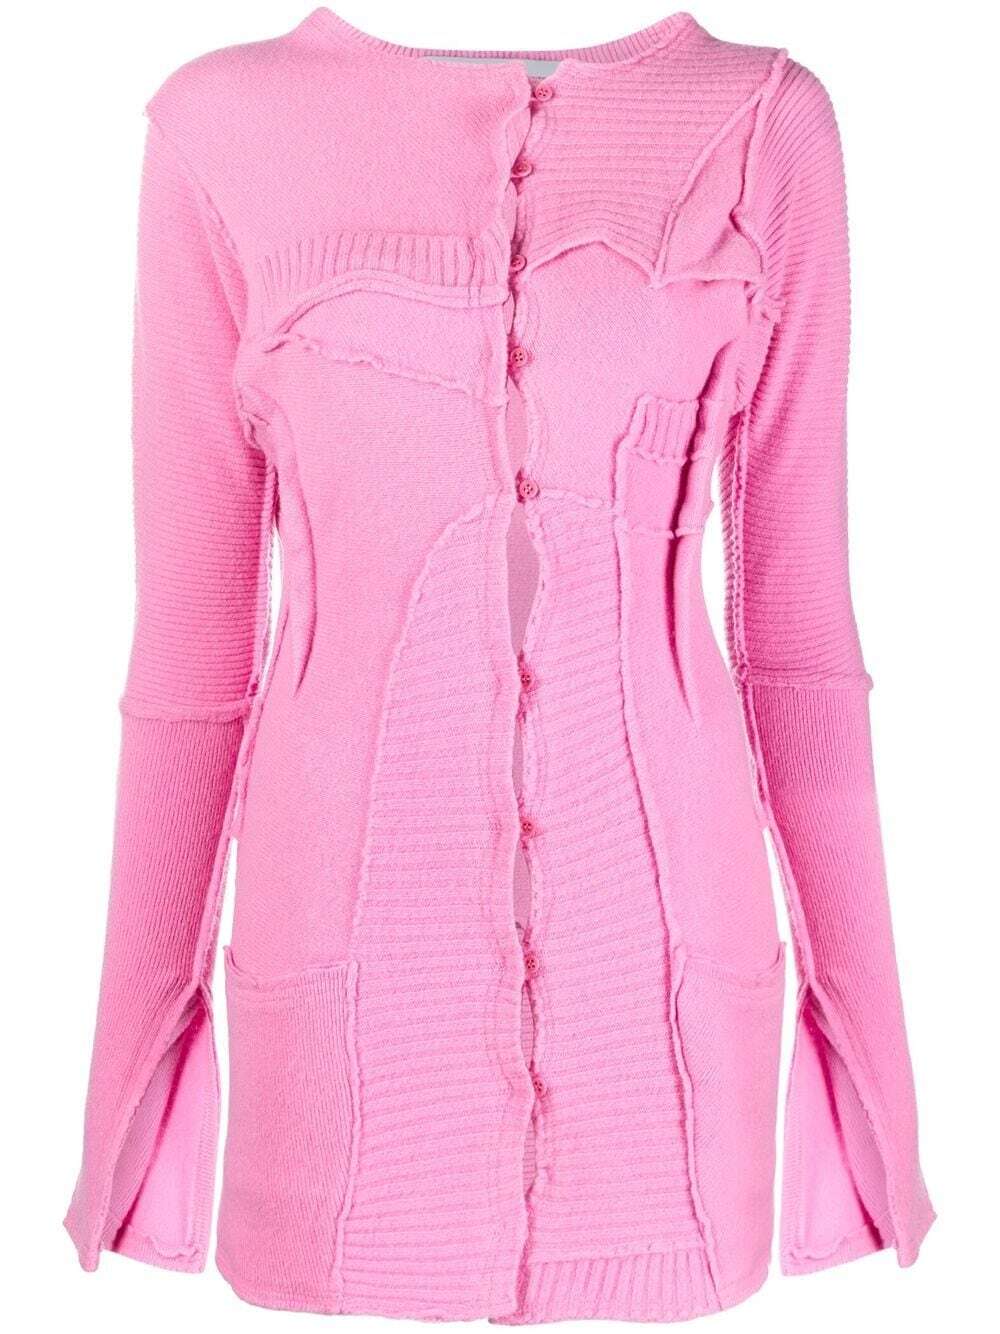 Talia Byre knitted patchwork cardigan - Pink